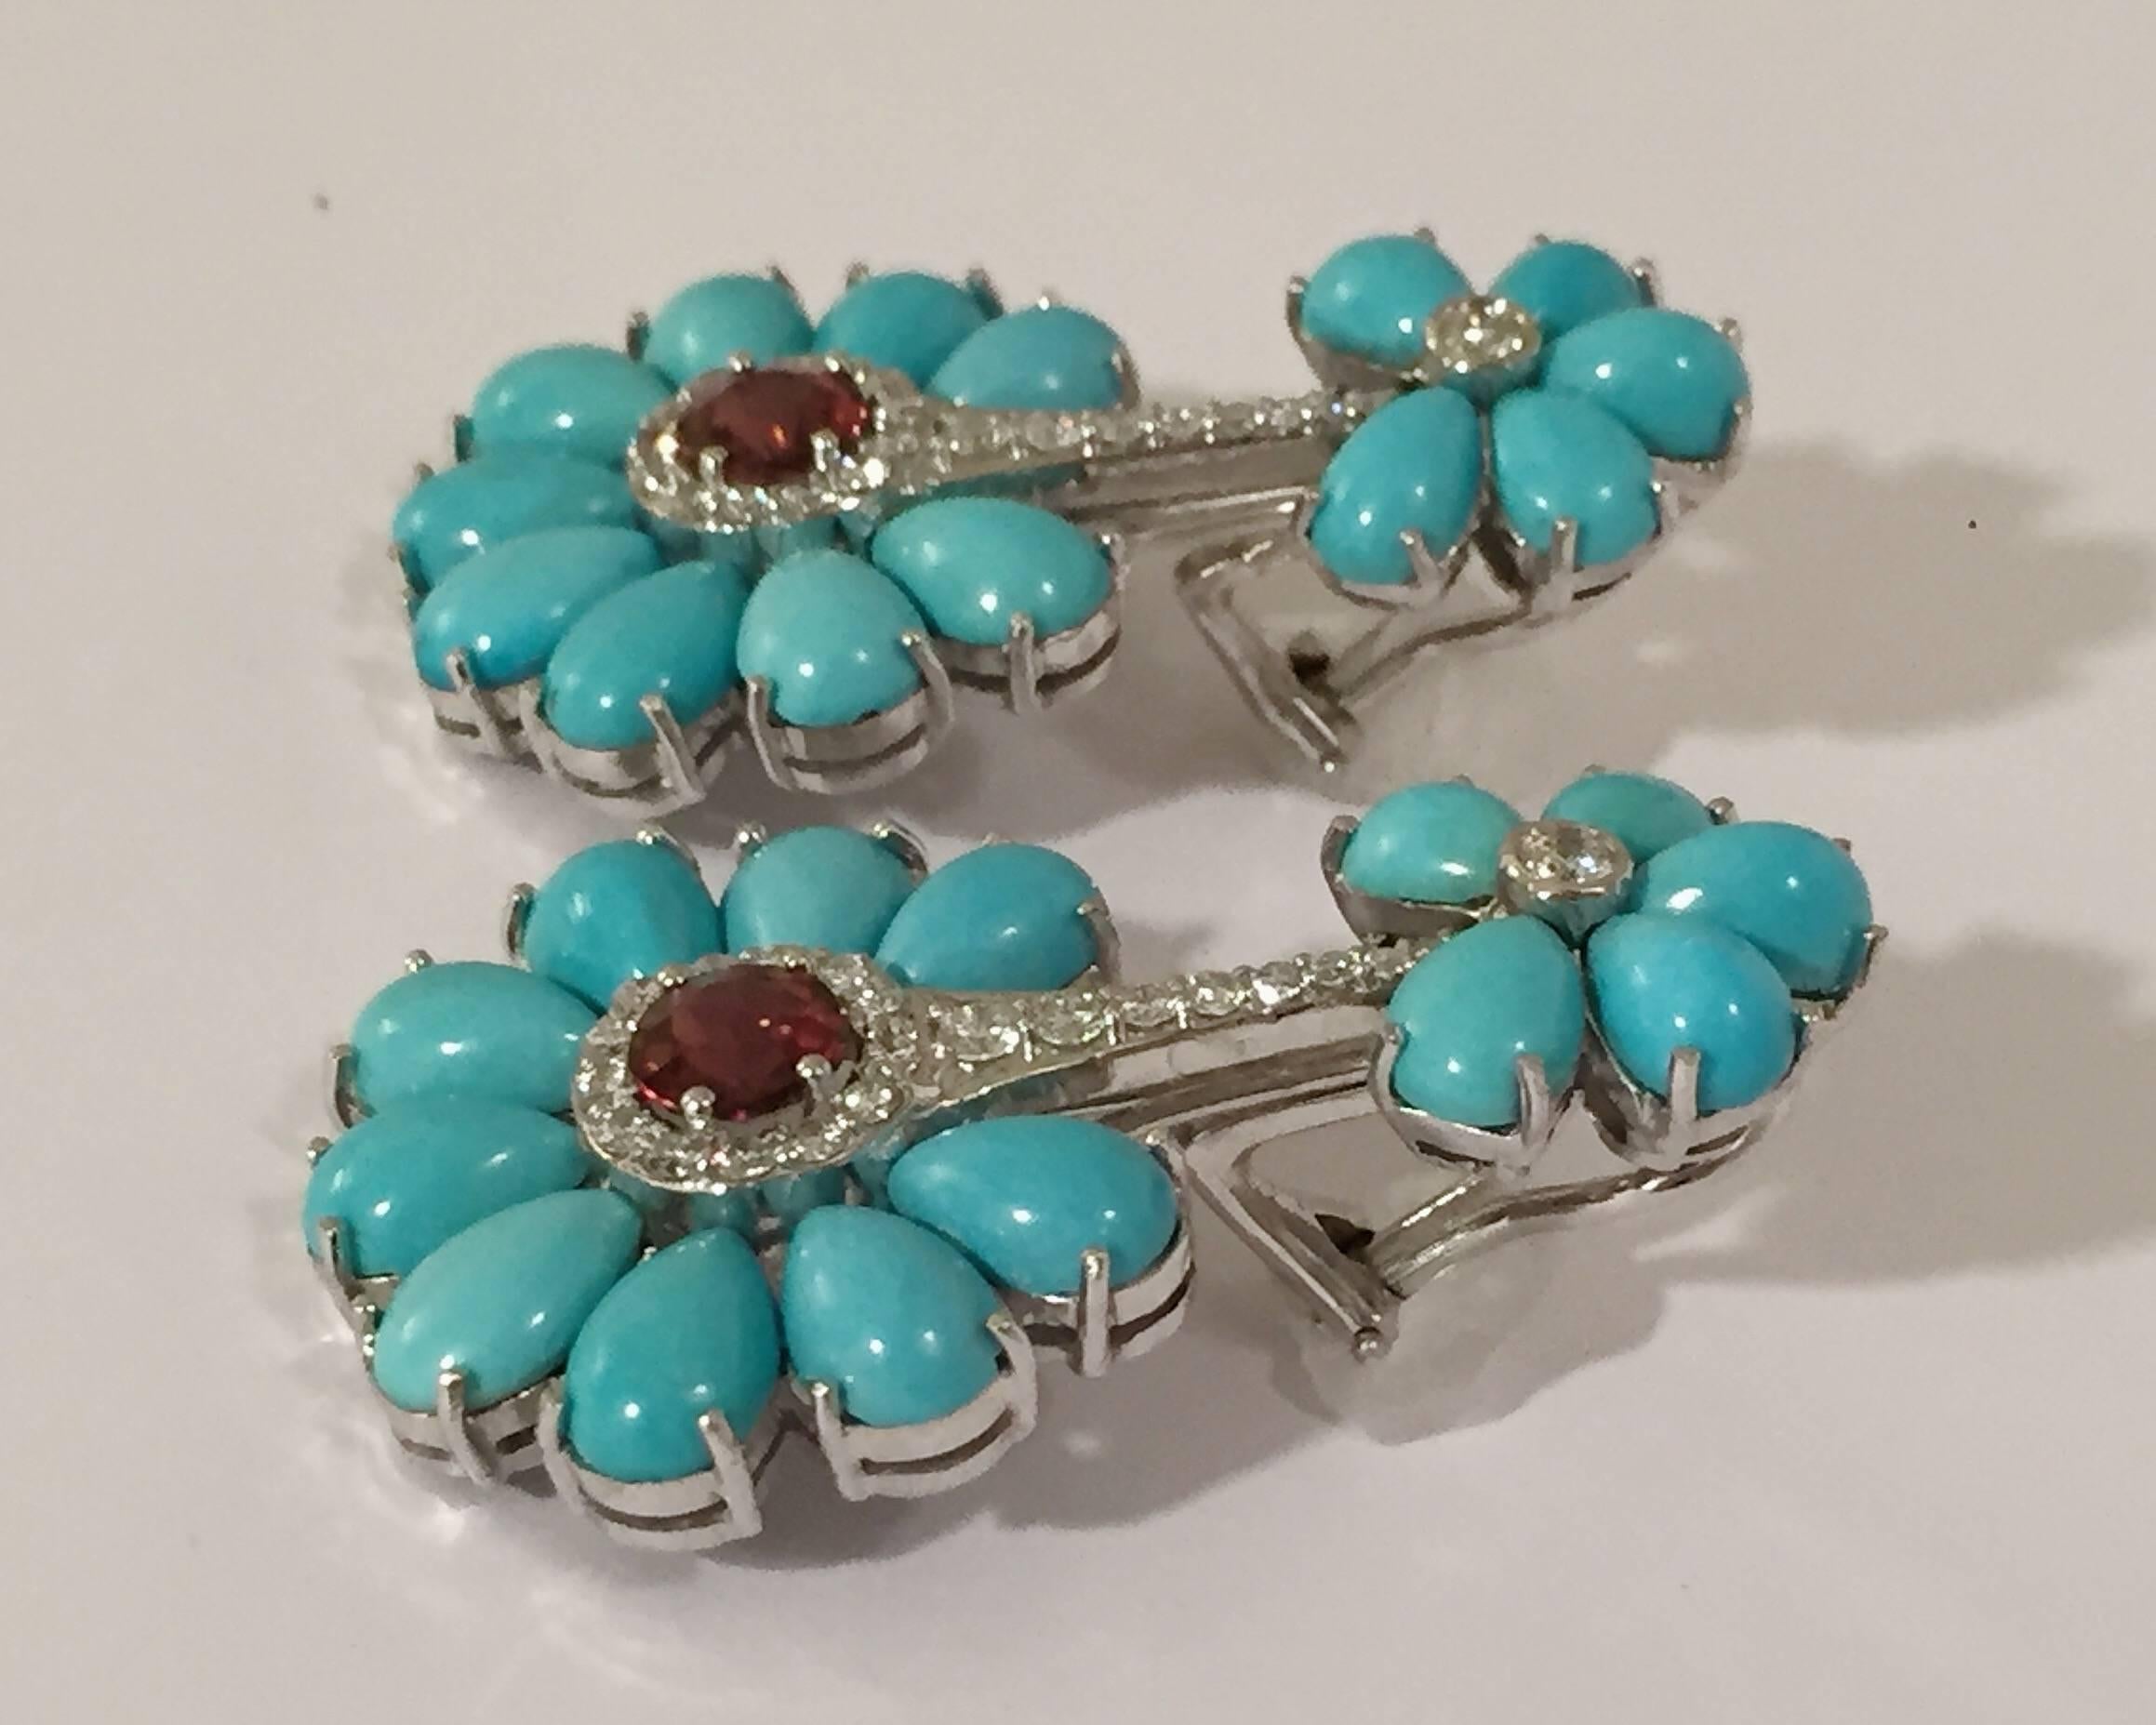 Elegant Turquoise Drop earring set in 14kt White Gold with Diamonds and Rubelite center with 28 pear shaped Turquoise .  The circular patterns frames rounds diamonds weighing approximately 1/50 cts and two faceted Rubelite.  The earrings can be made